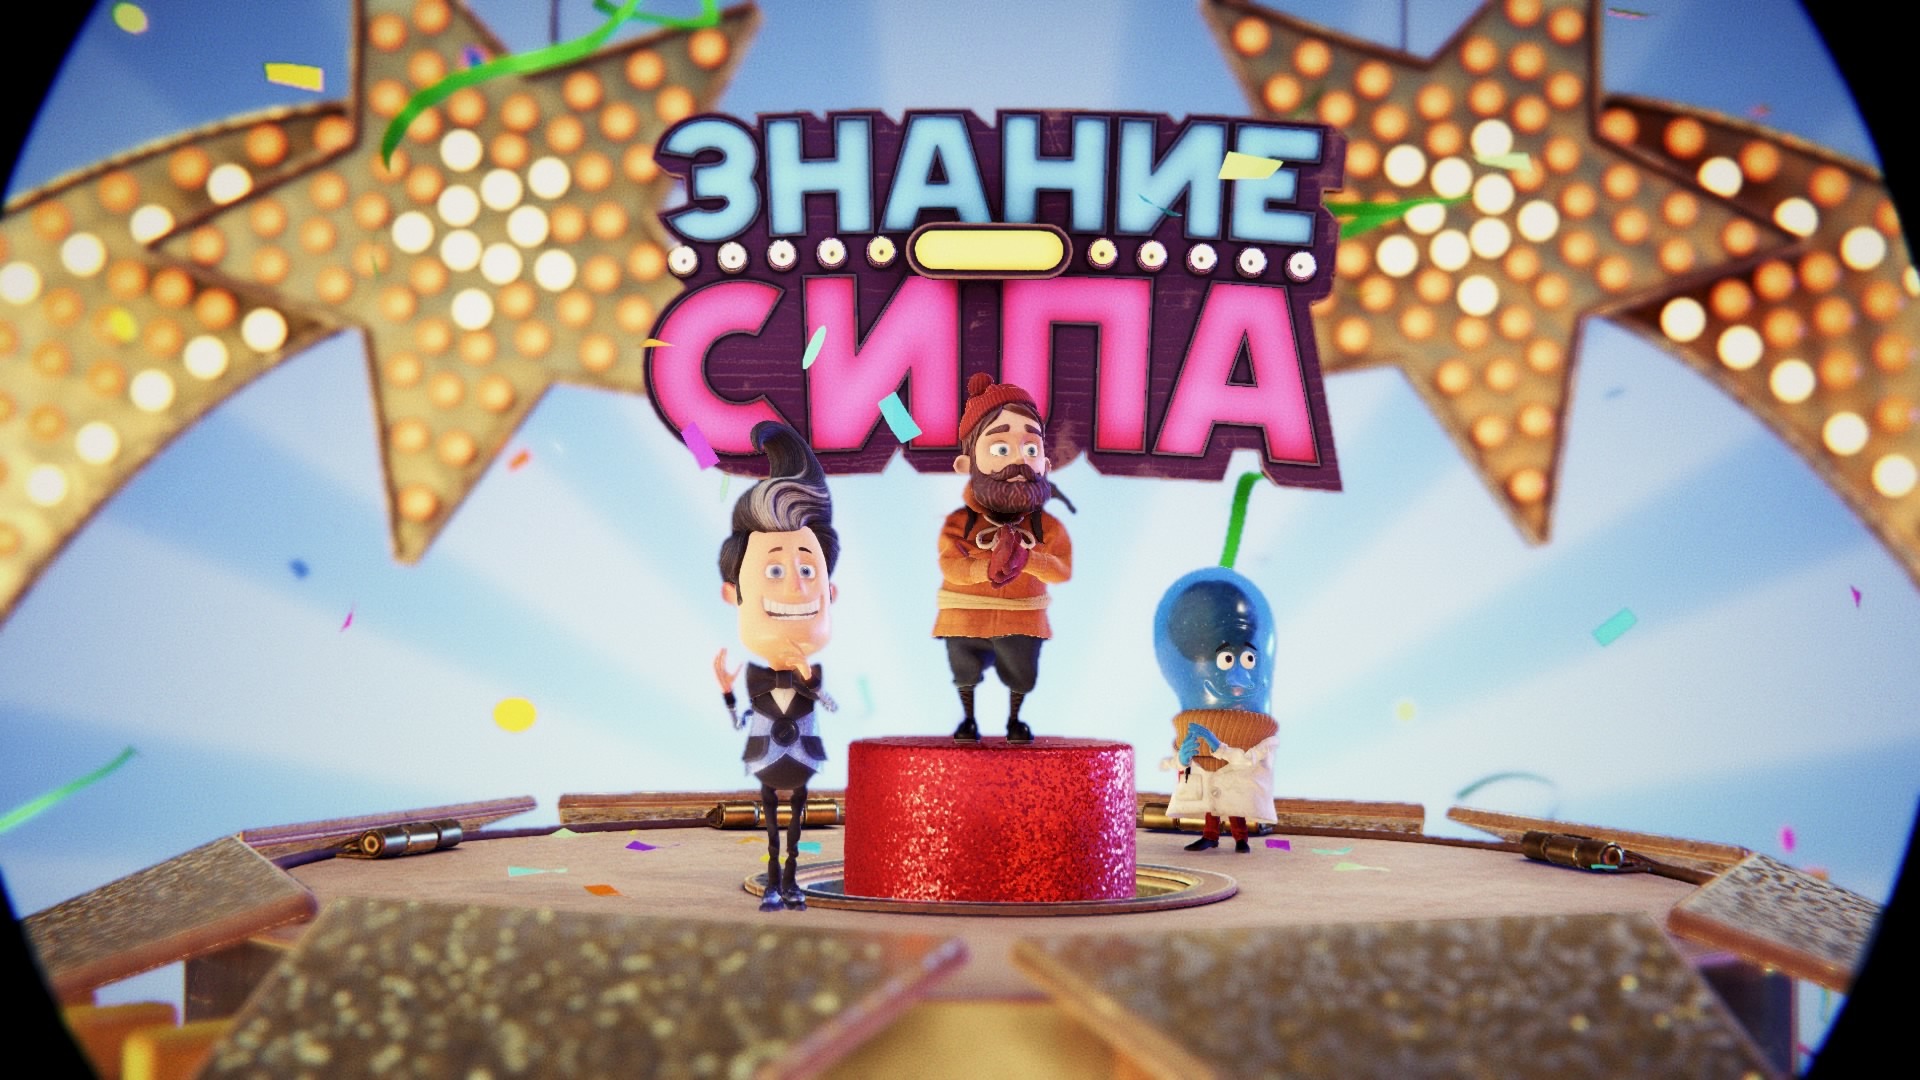 Скриншот *Knowledge is Power | Знание – сила [PS4 Exclusive PlayLink] 5.05 / 6.72 / 7.02 [EUR] (2017) [Русский] (v1.01)*